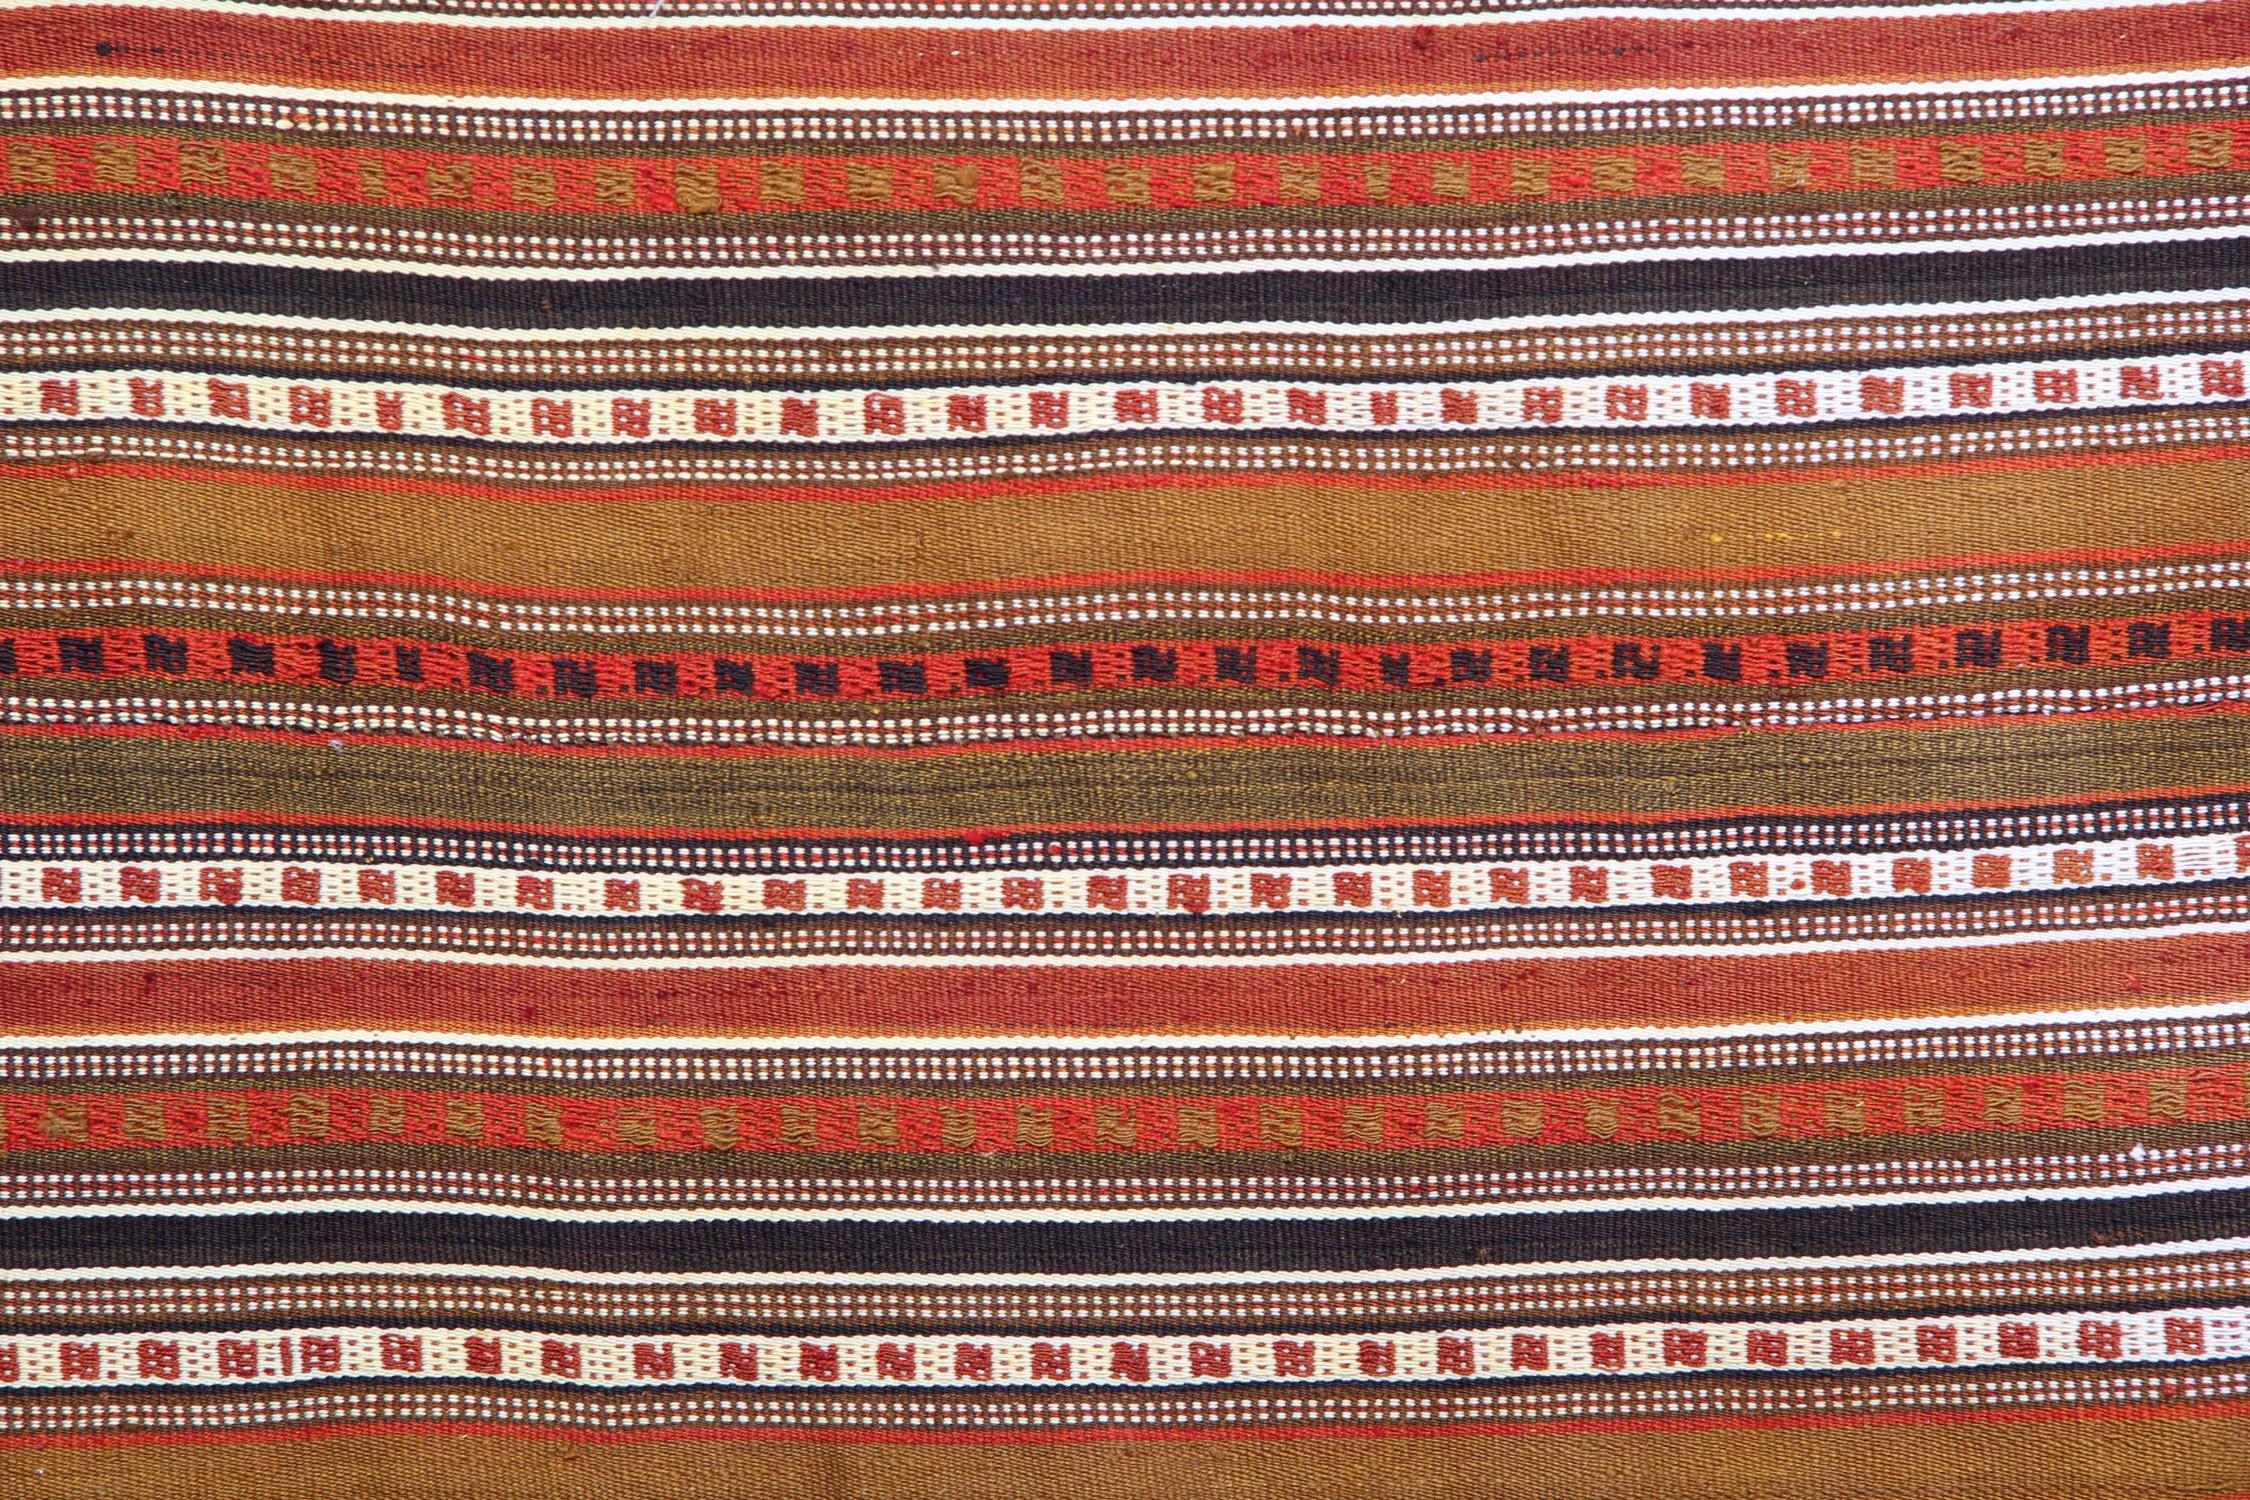 Country Antique Rugs Azerbaijan 'Jajim' Red Striped Handmade Flat-Woven Textile For Sale